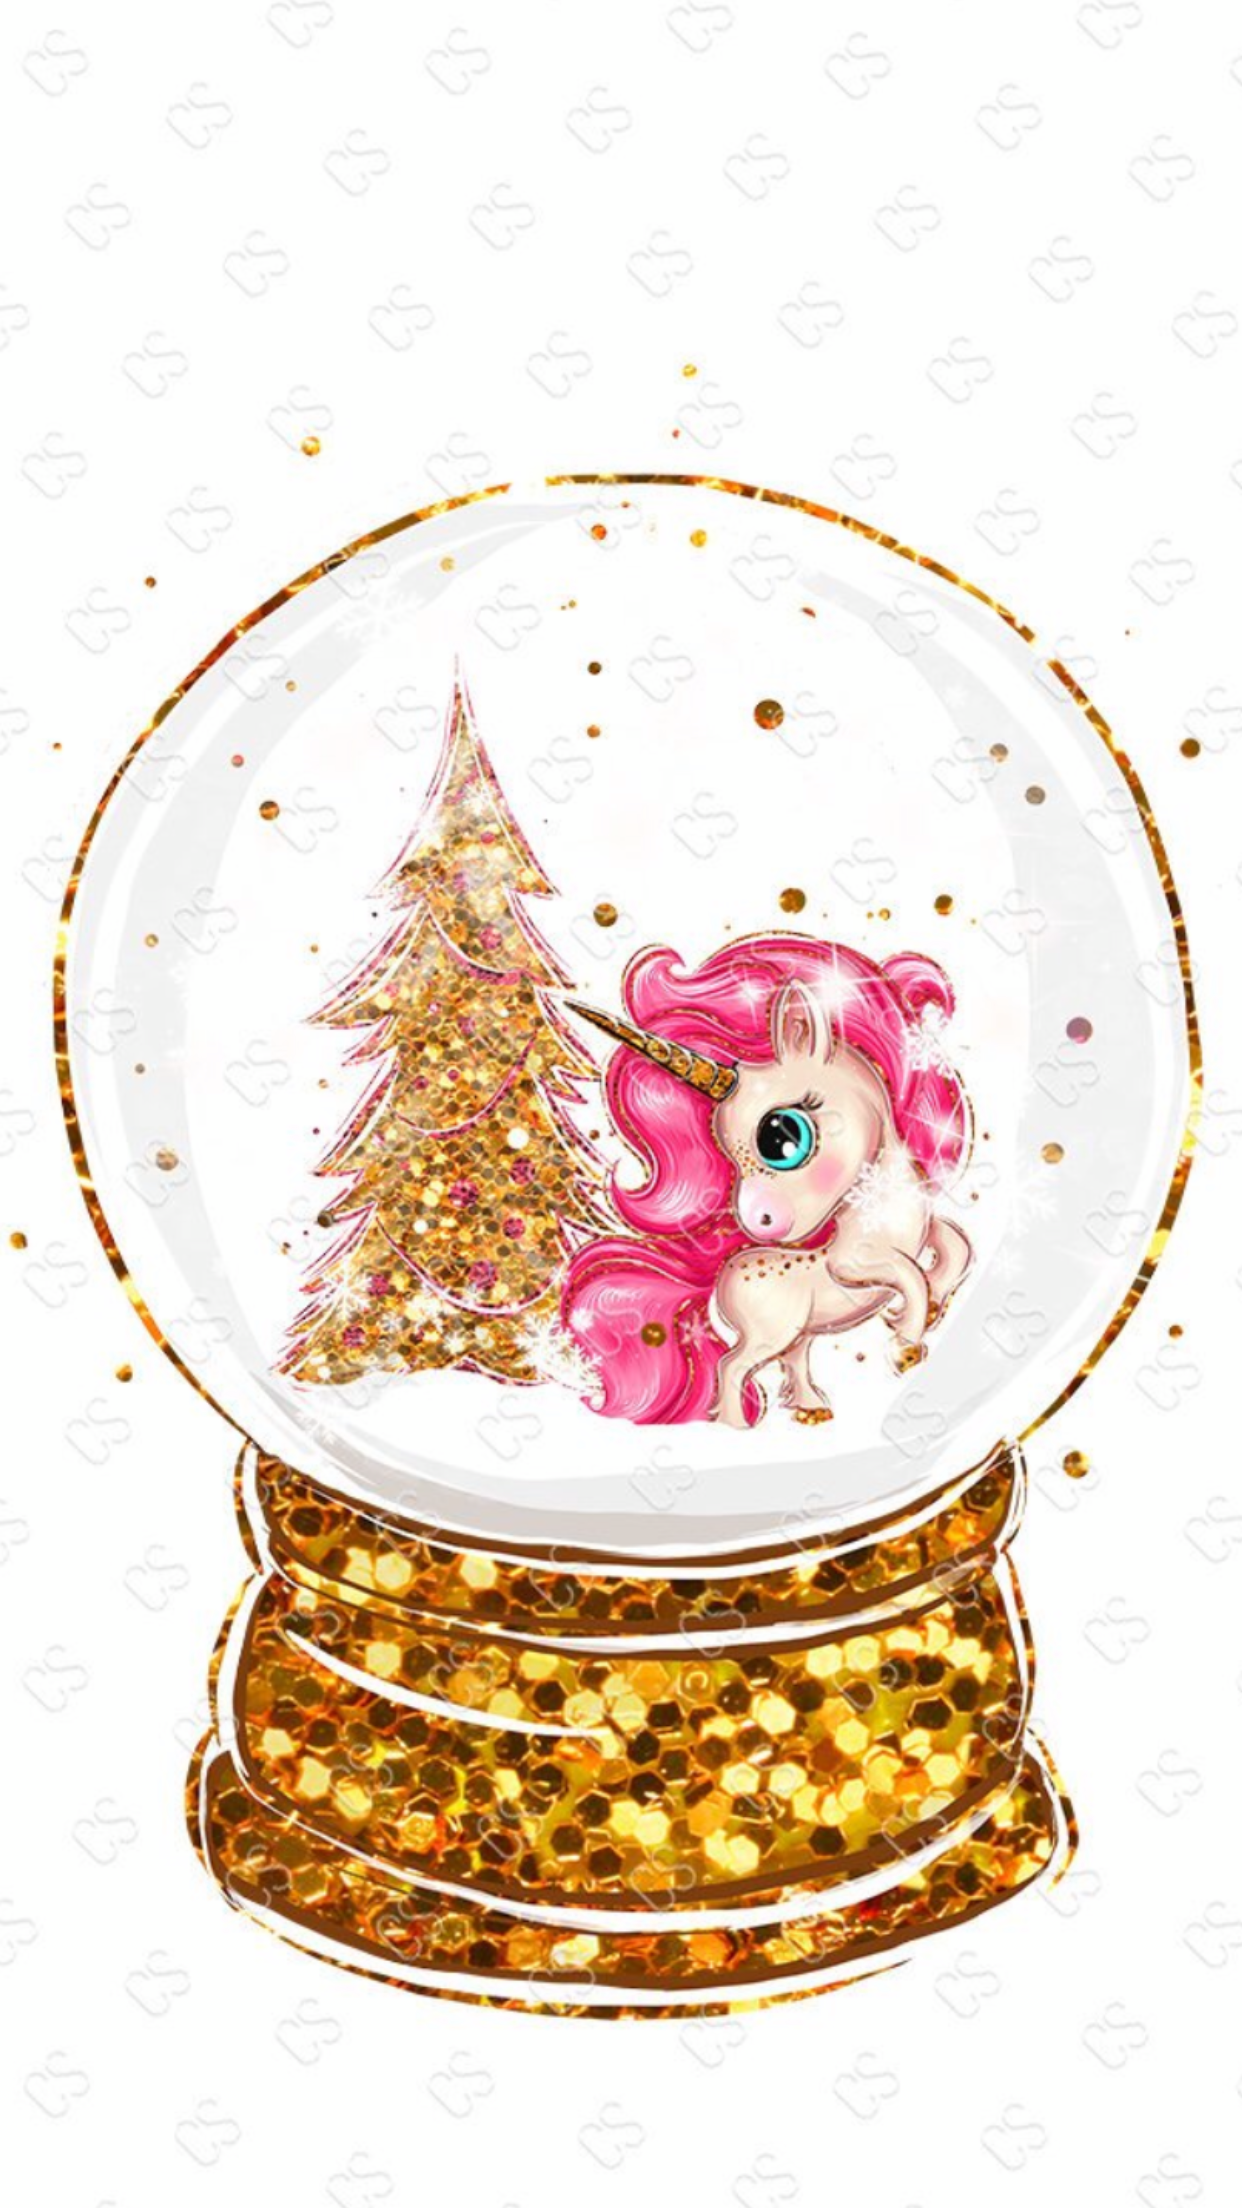 Wallpaper. By Artist Unknown. Cute christmas wallpaper, Unicorn wallpaper, Winter wallpaper